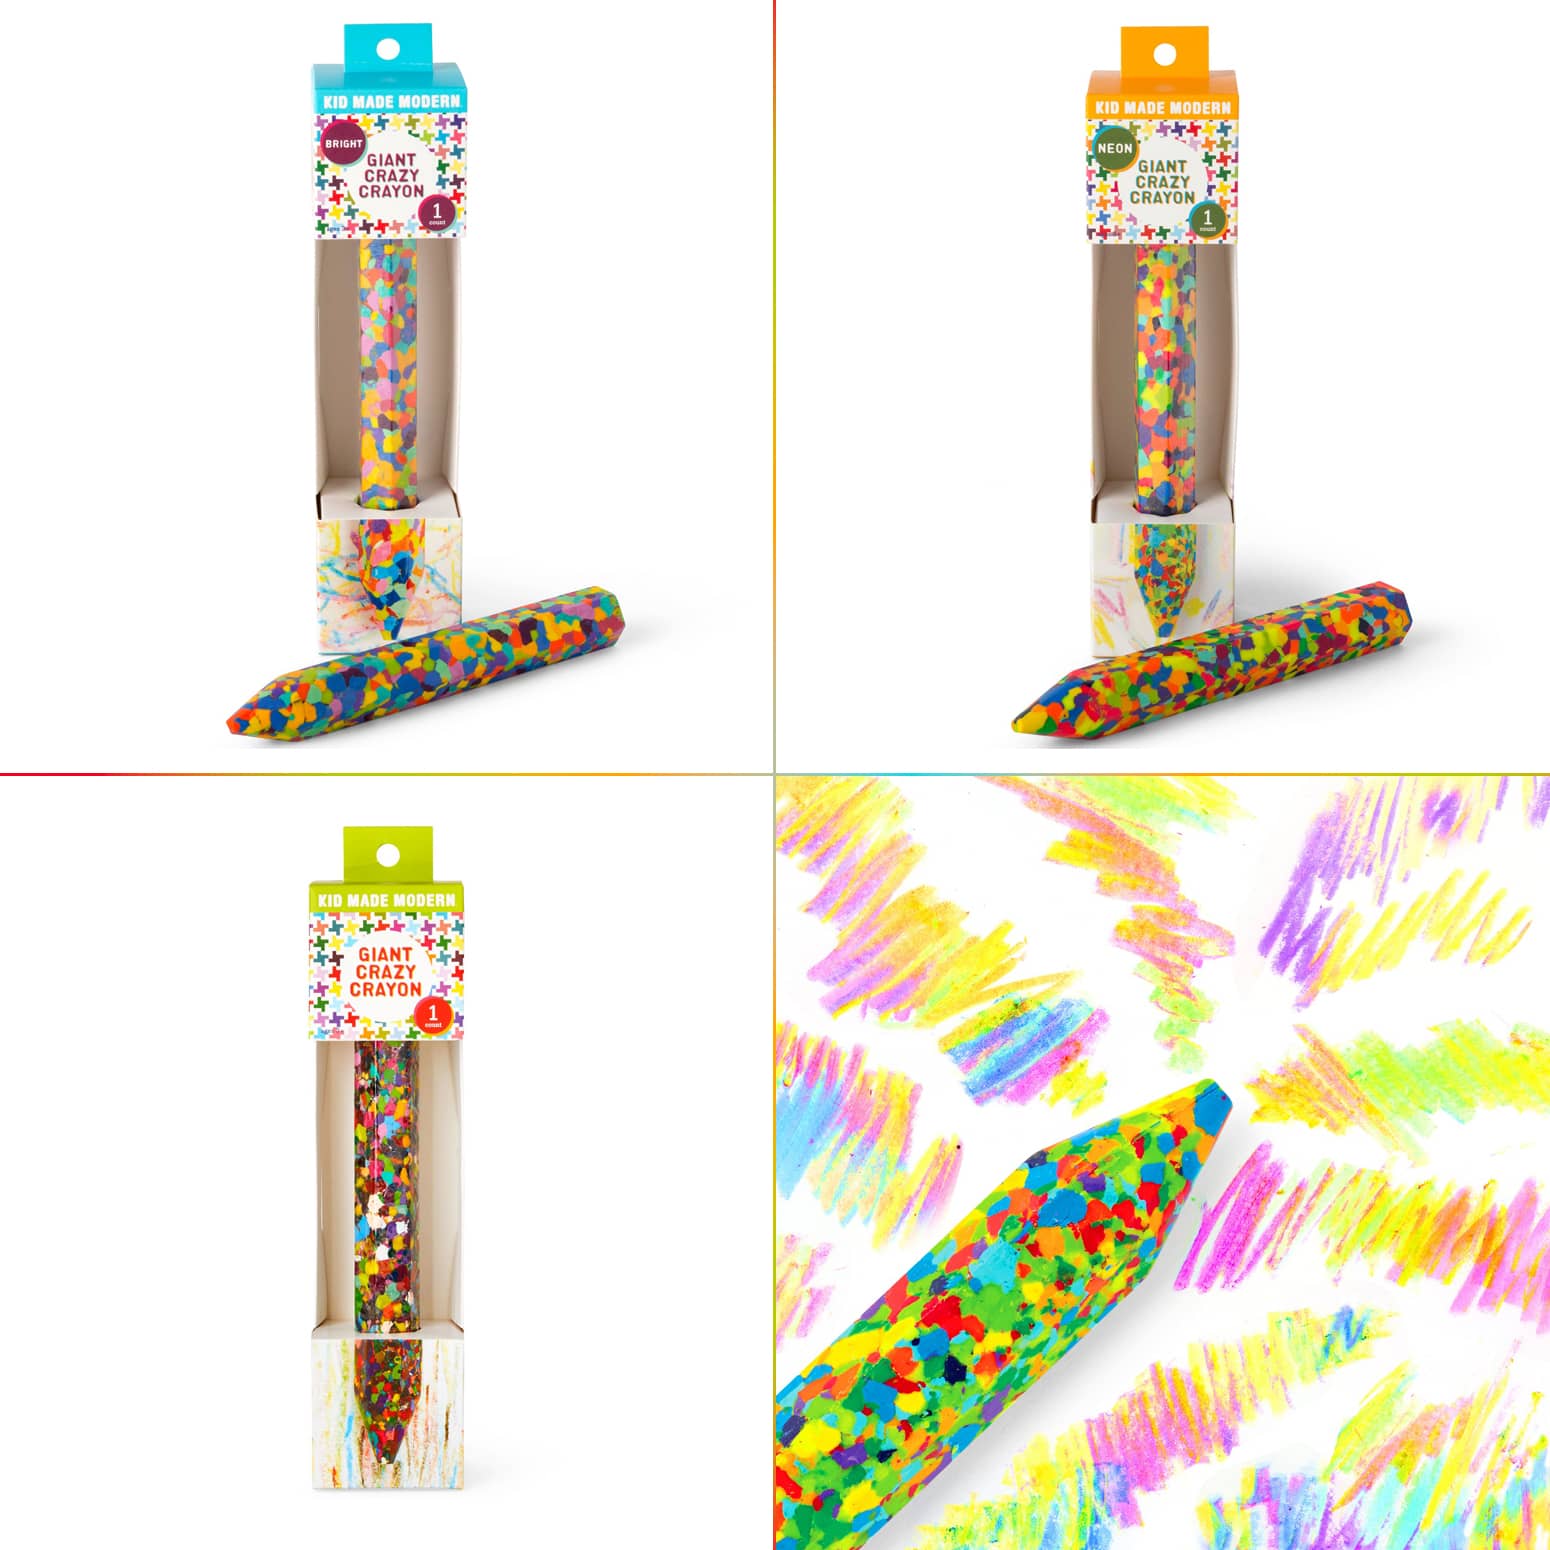 Giant Crazy Crayons - 64 Colors Smushed Together